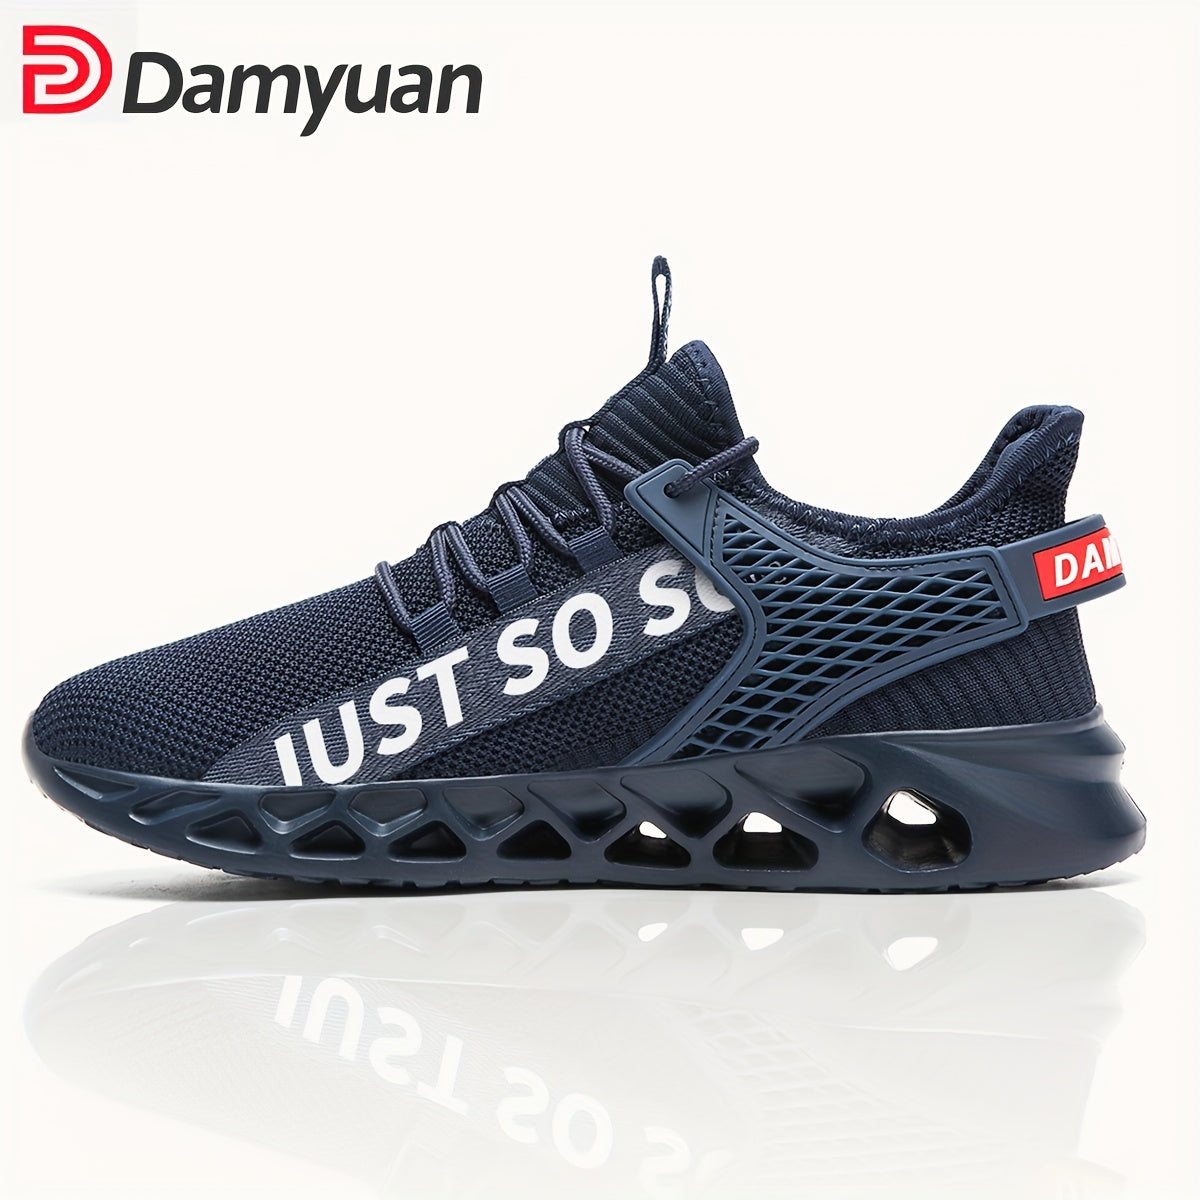 Damyuan Blade Type Shoes, Breathable Shock Absorption